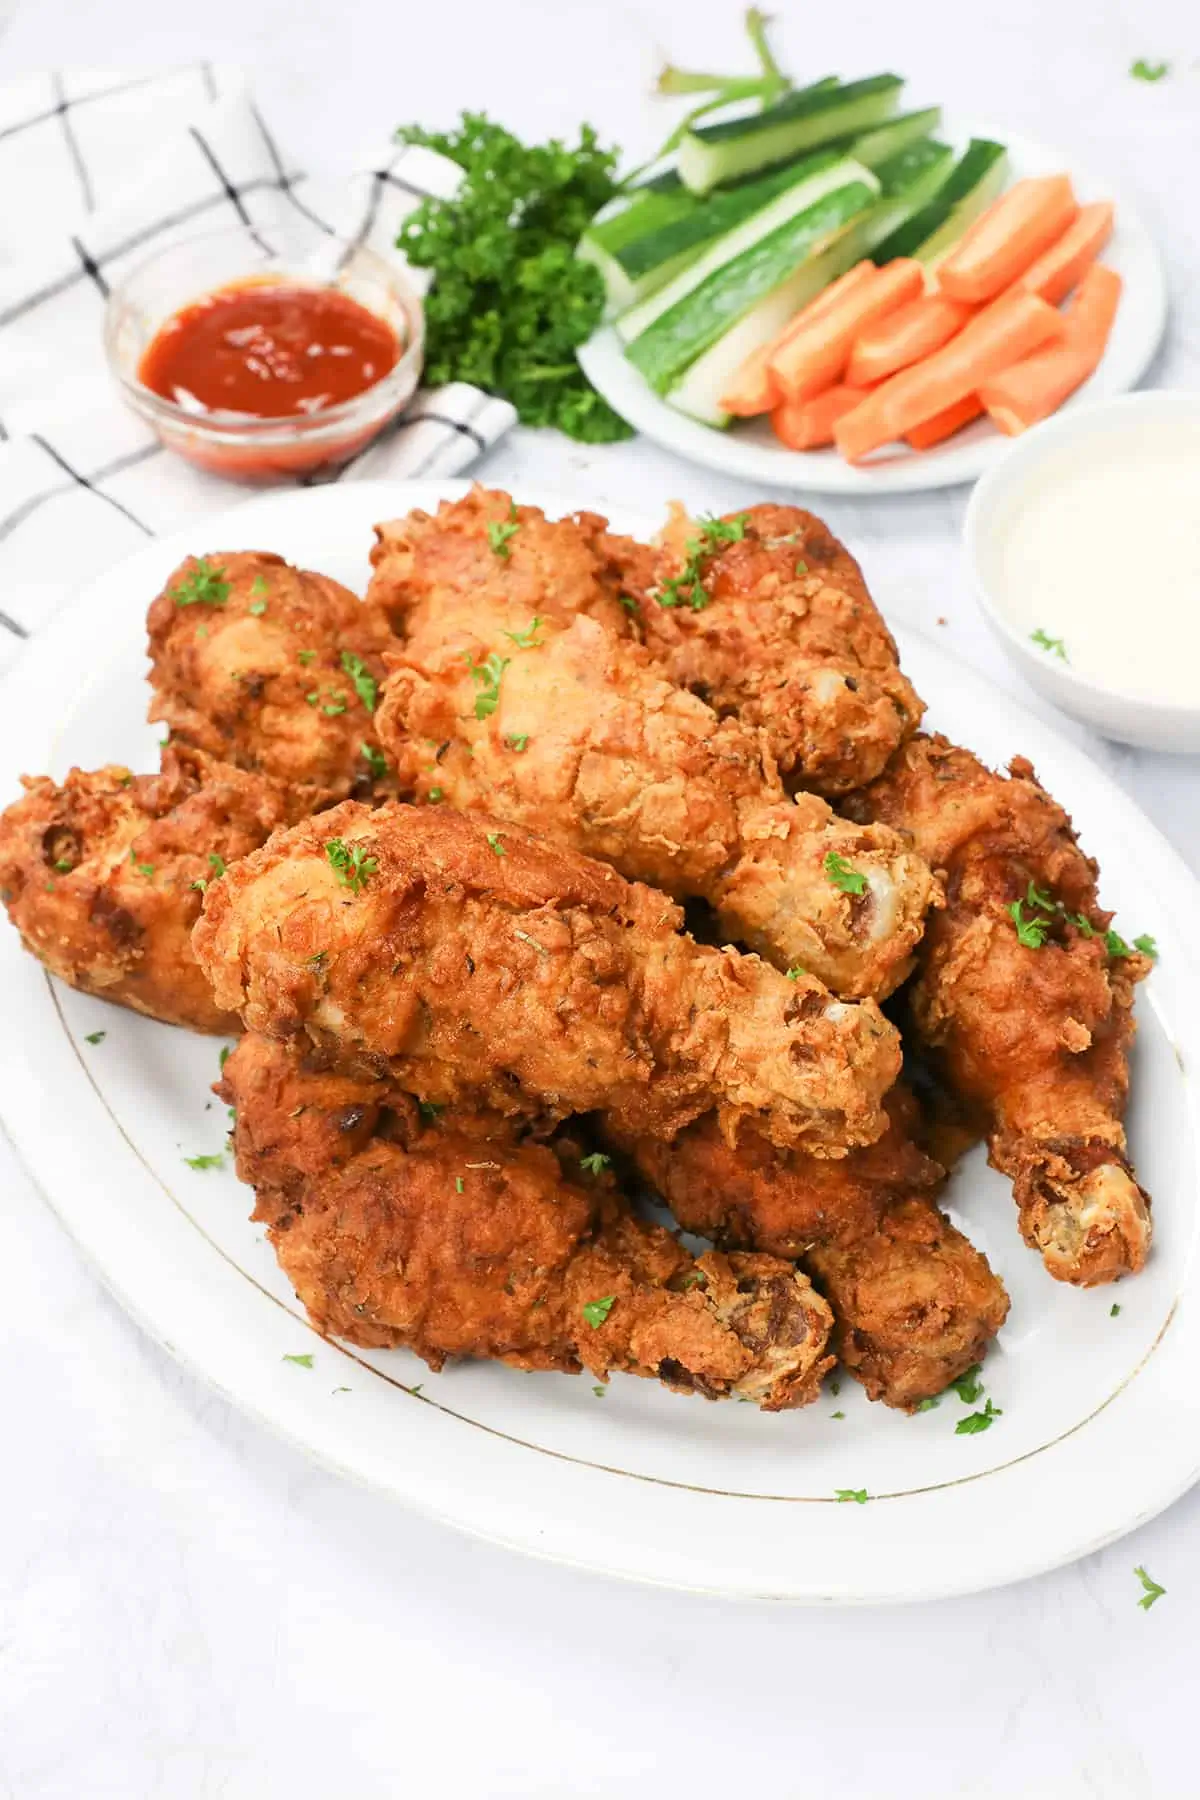 Deep-Fried Chicken Legs: Recipe and Step-by-Step Instructions